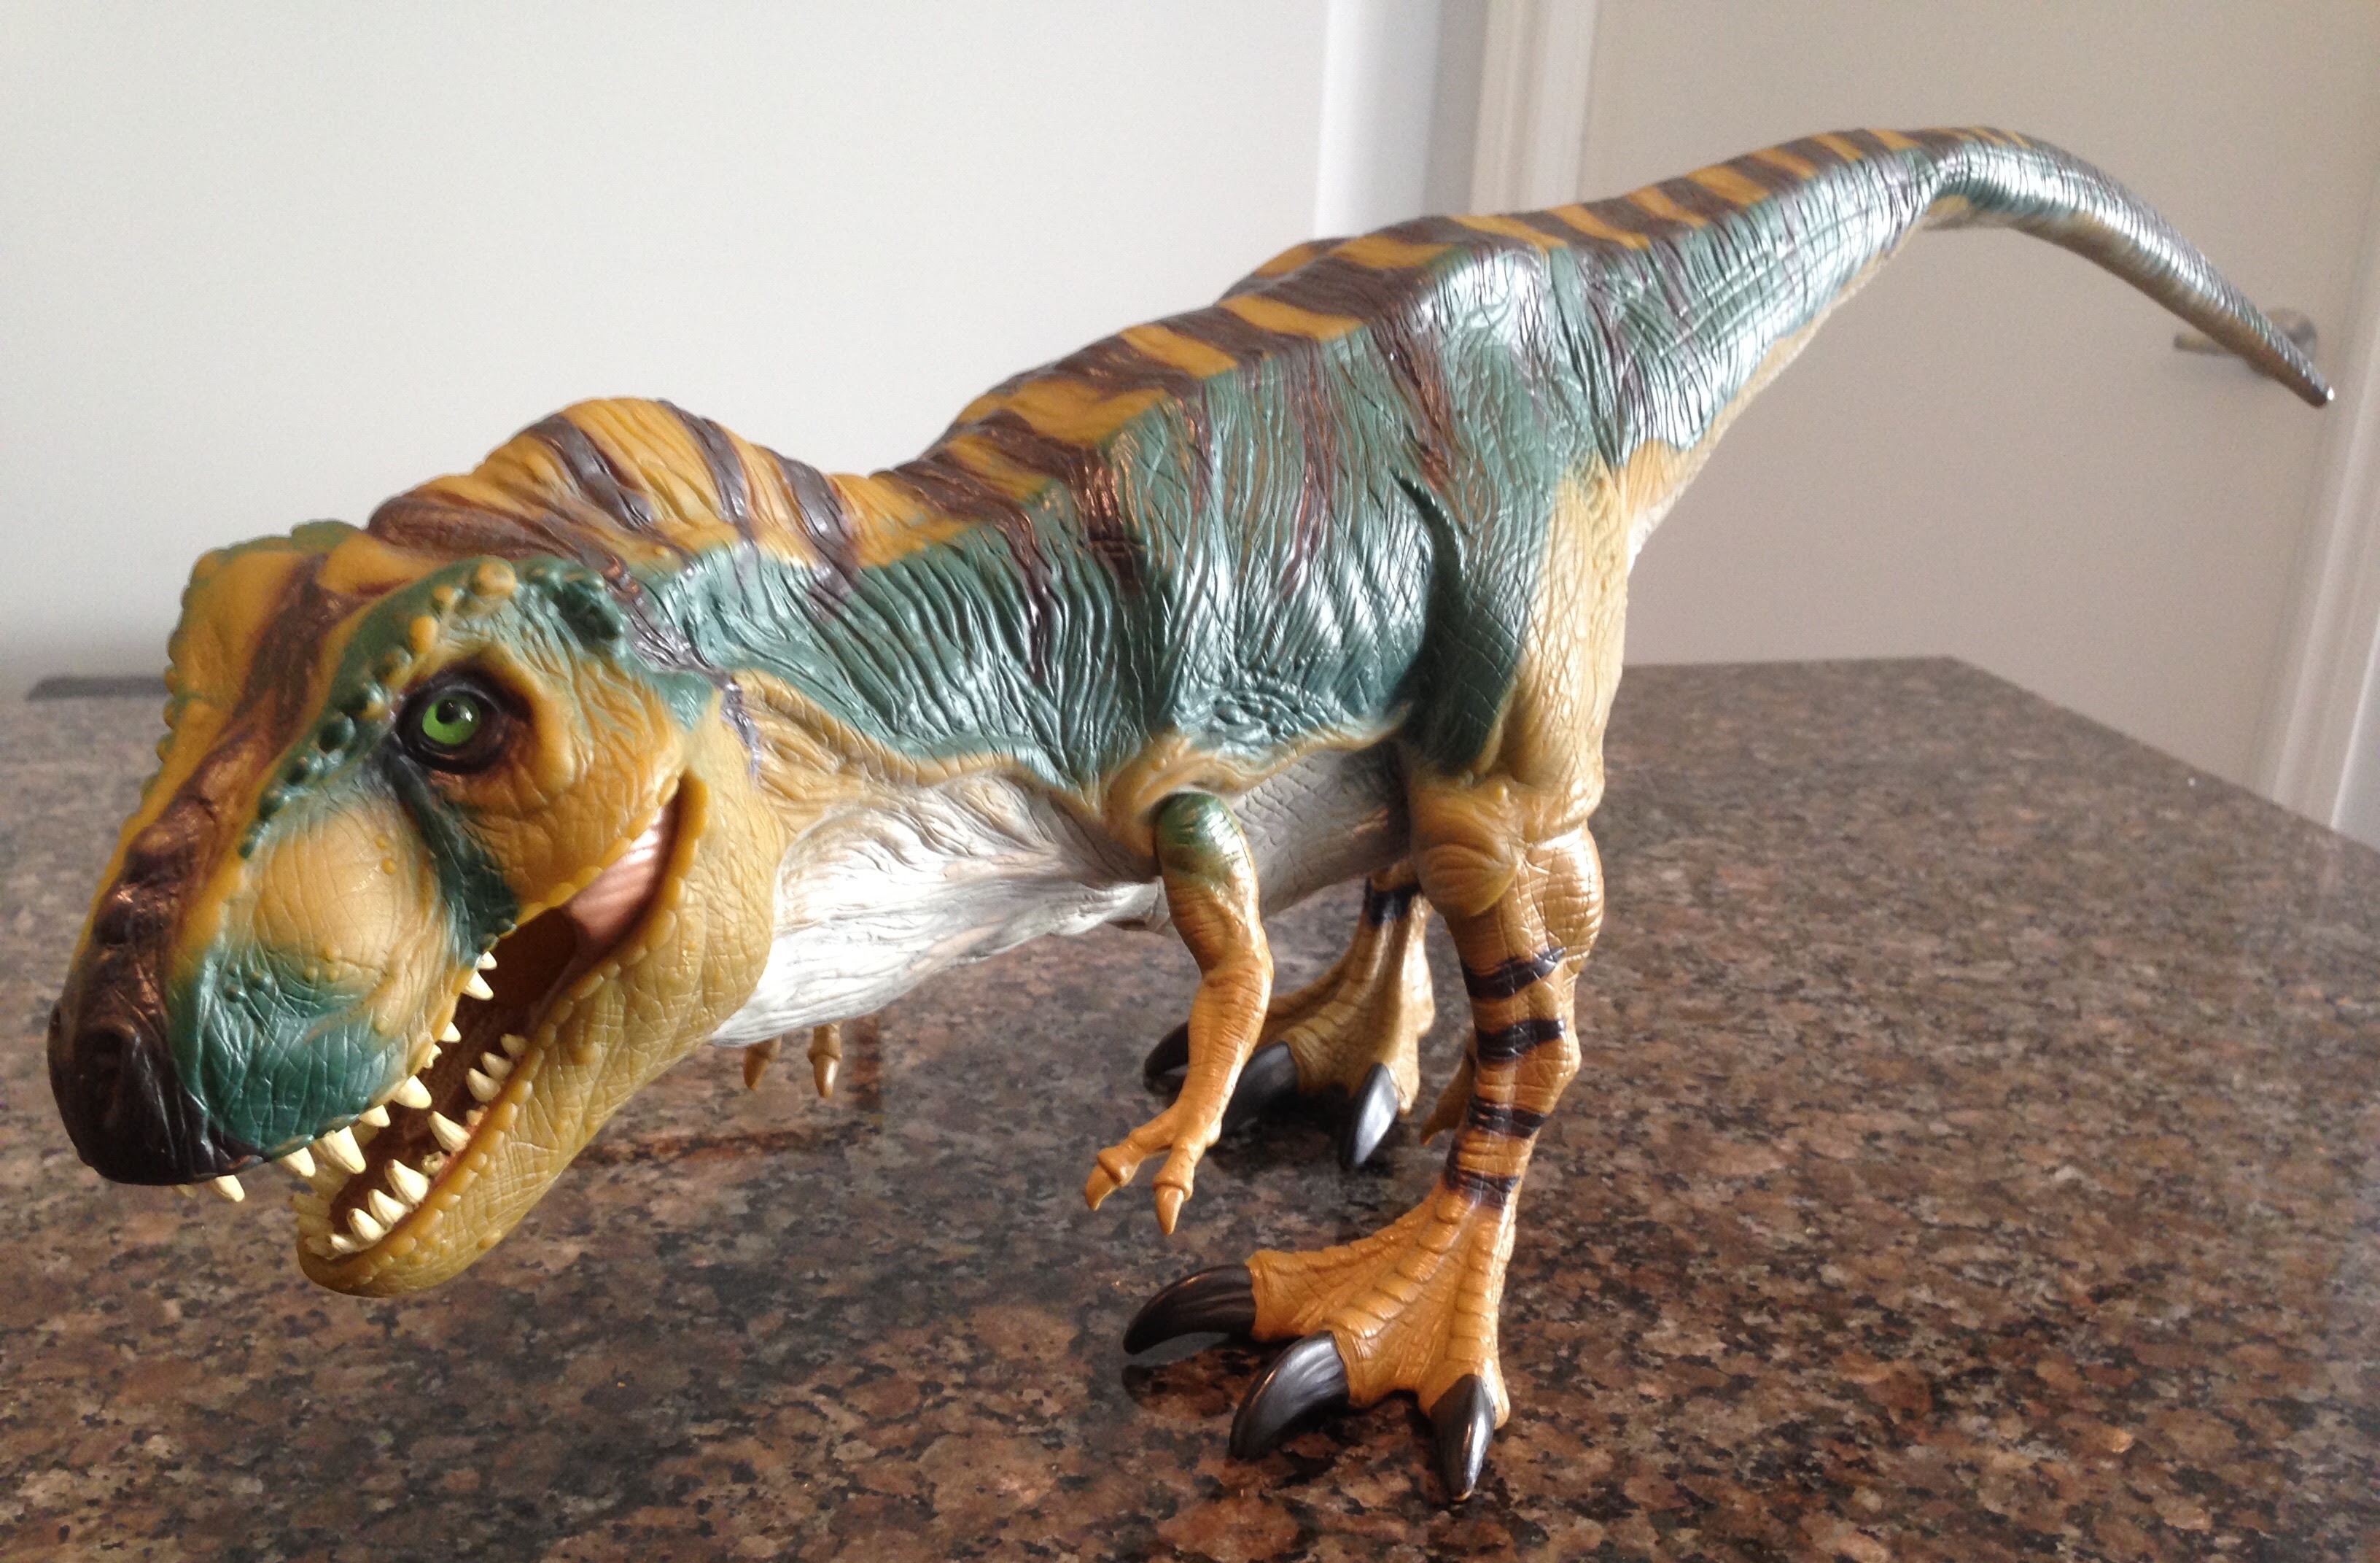 Tyrannosaurus Rex (Bull from The Lost World Jurassic Park by Kenner